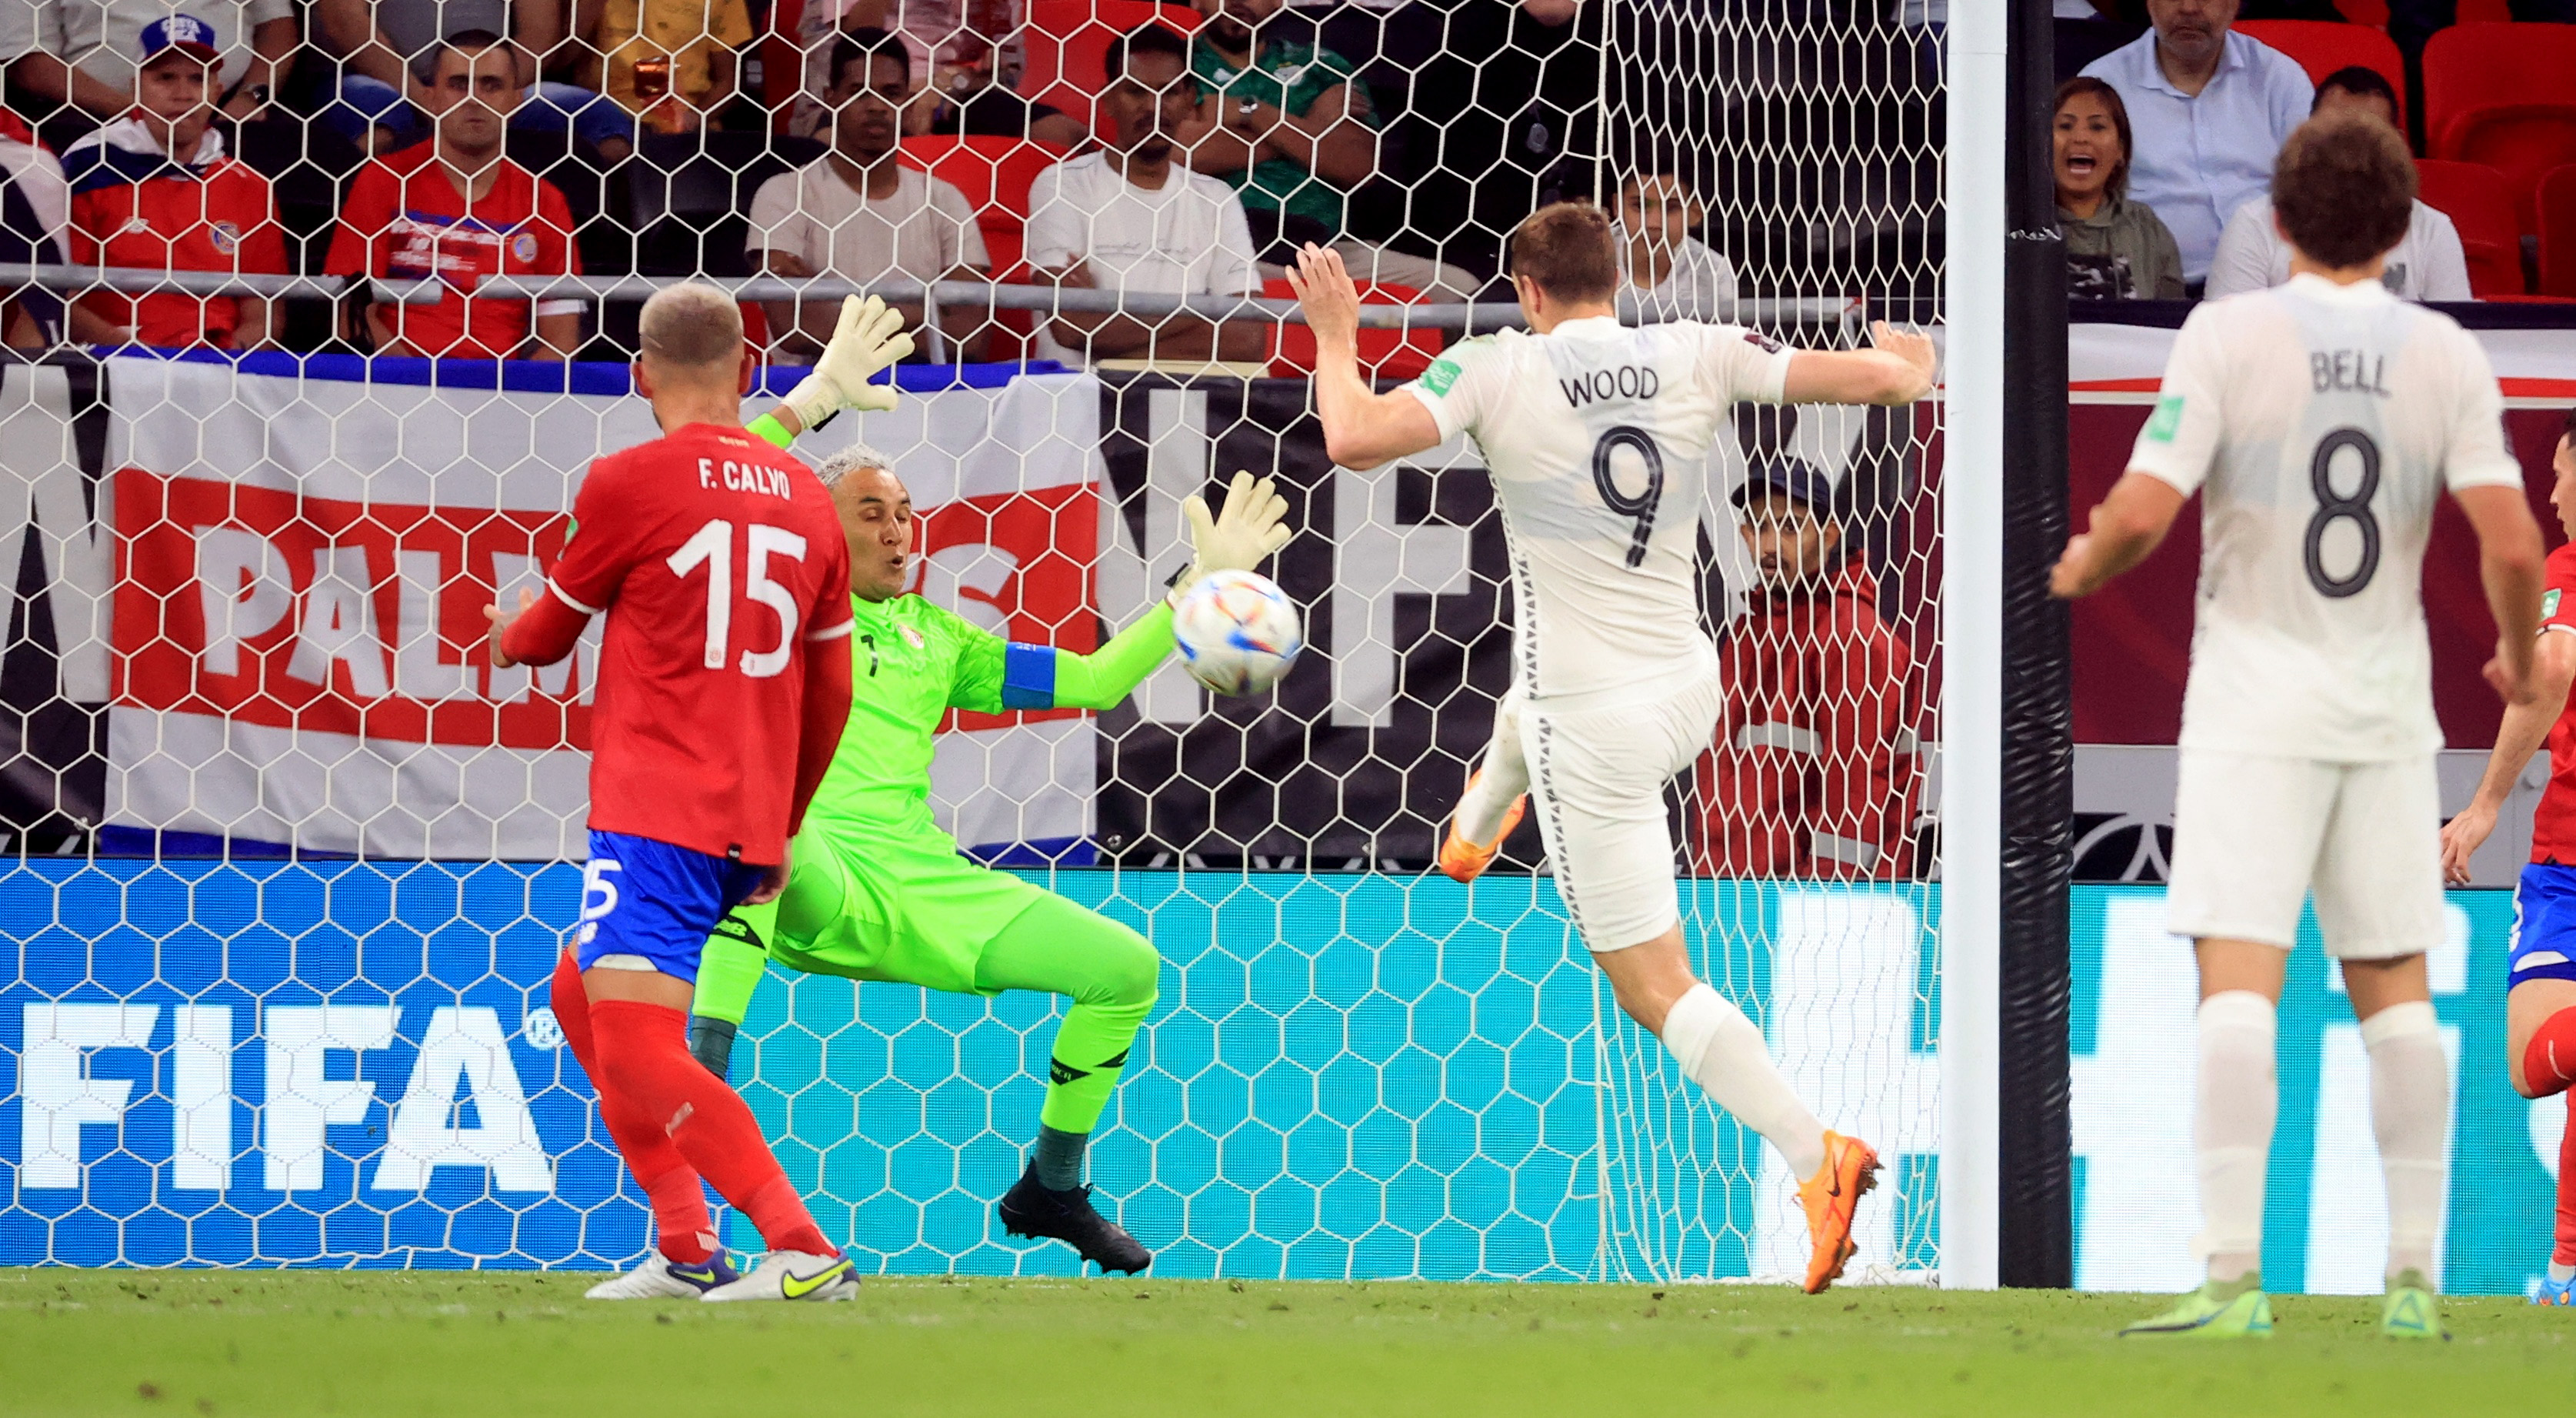 All White Chris Wood scoring the team's only goal which was disallowed. Photo: Reuters 

